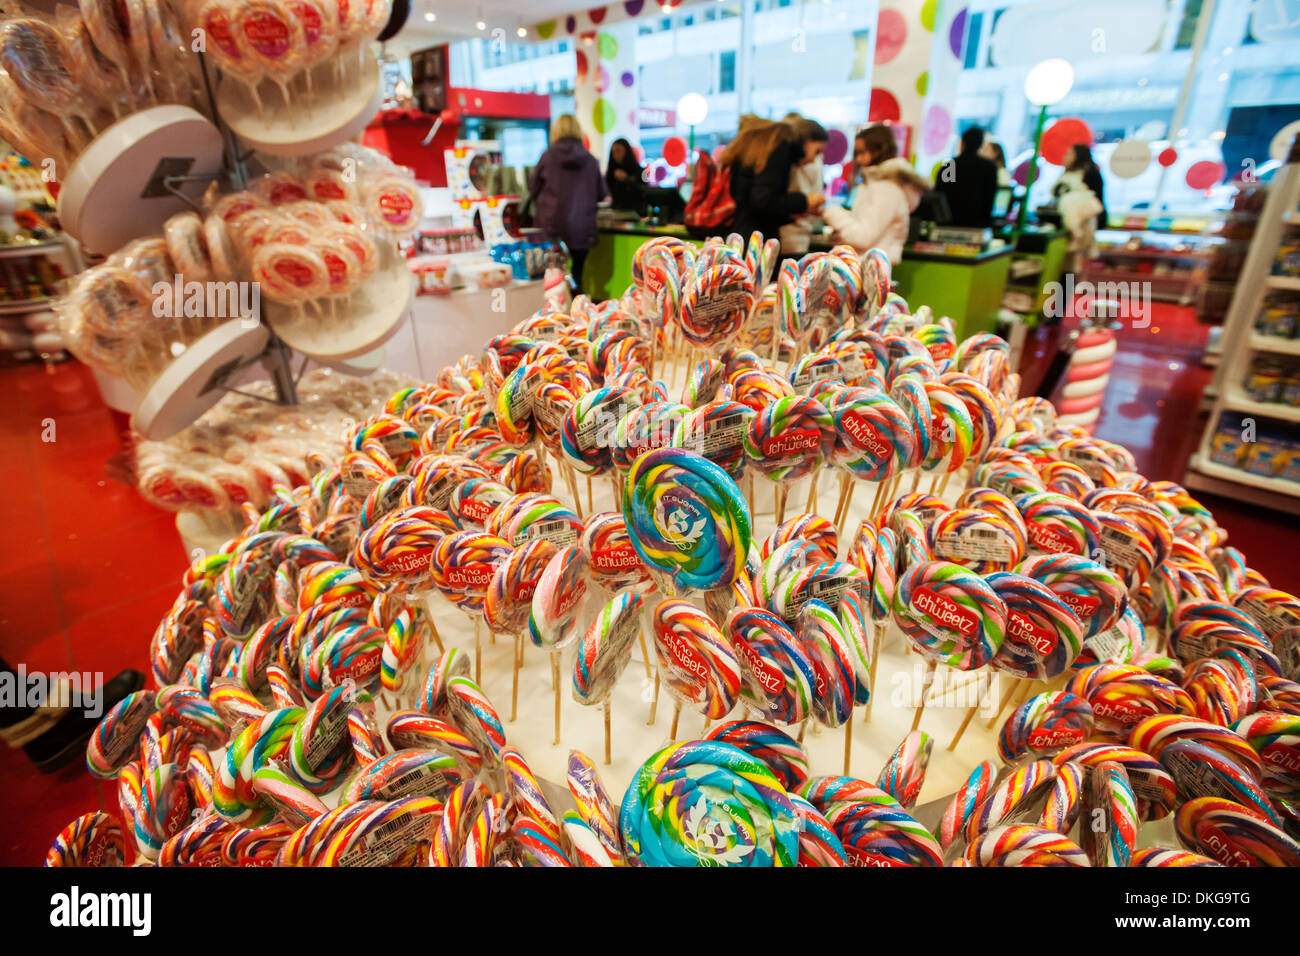 https://c8.alamy.com/comp/DKG9TG/the-fao-schweetz-candy-department-in-the-iconic-fao-schwarz-toy-store-DKG9TG.jpg